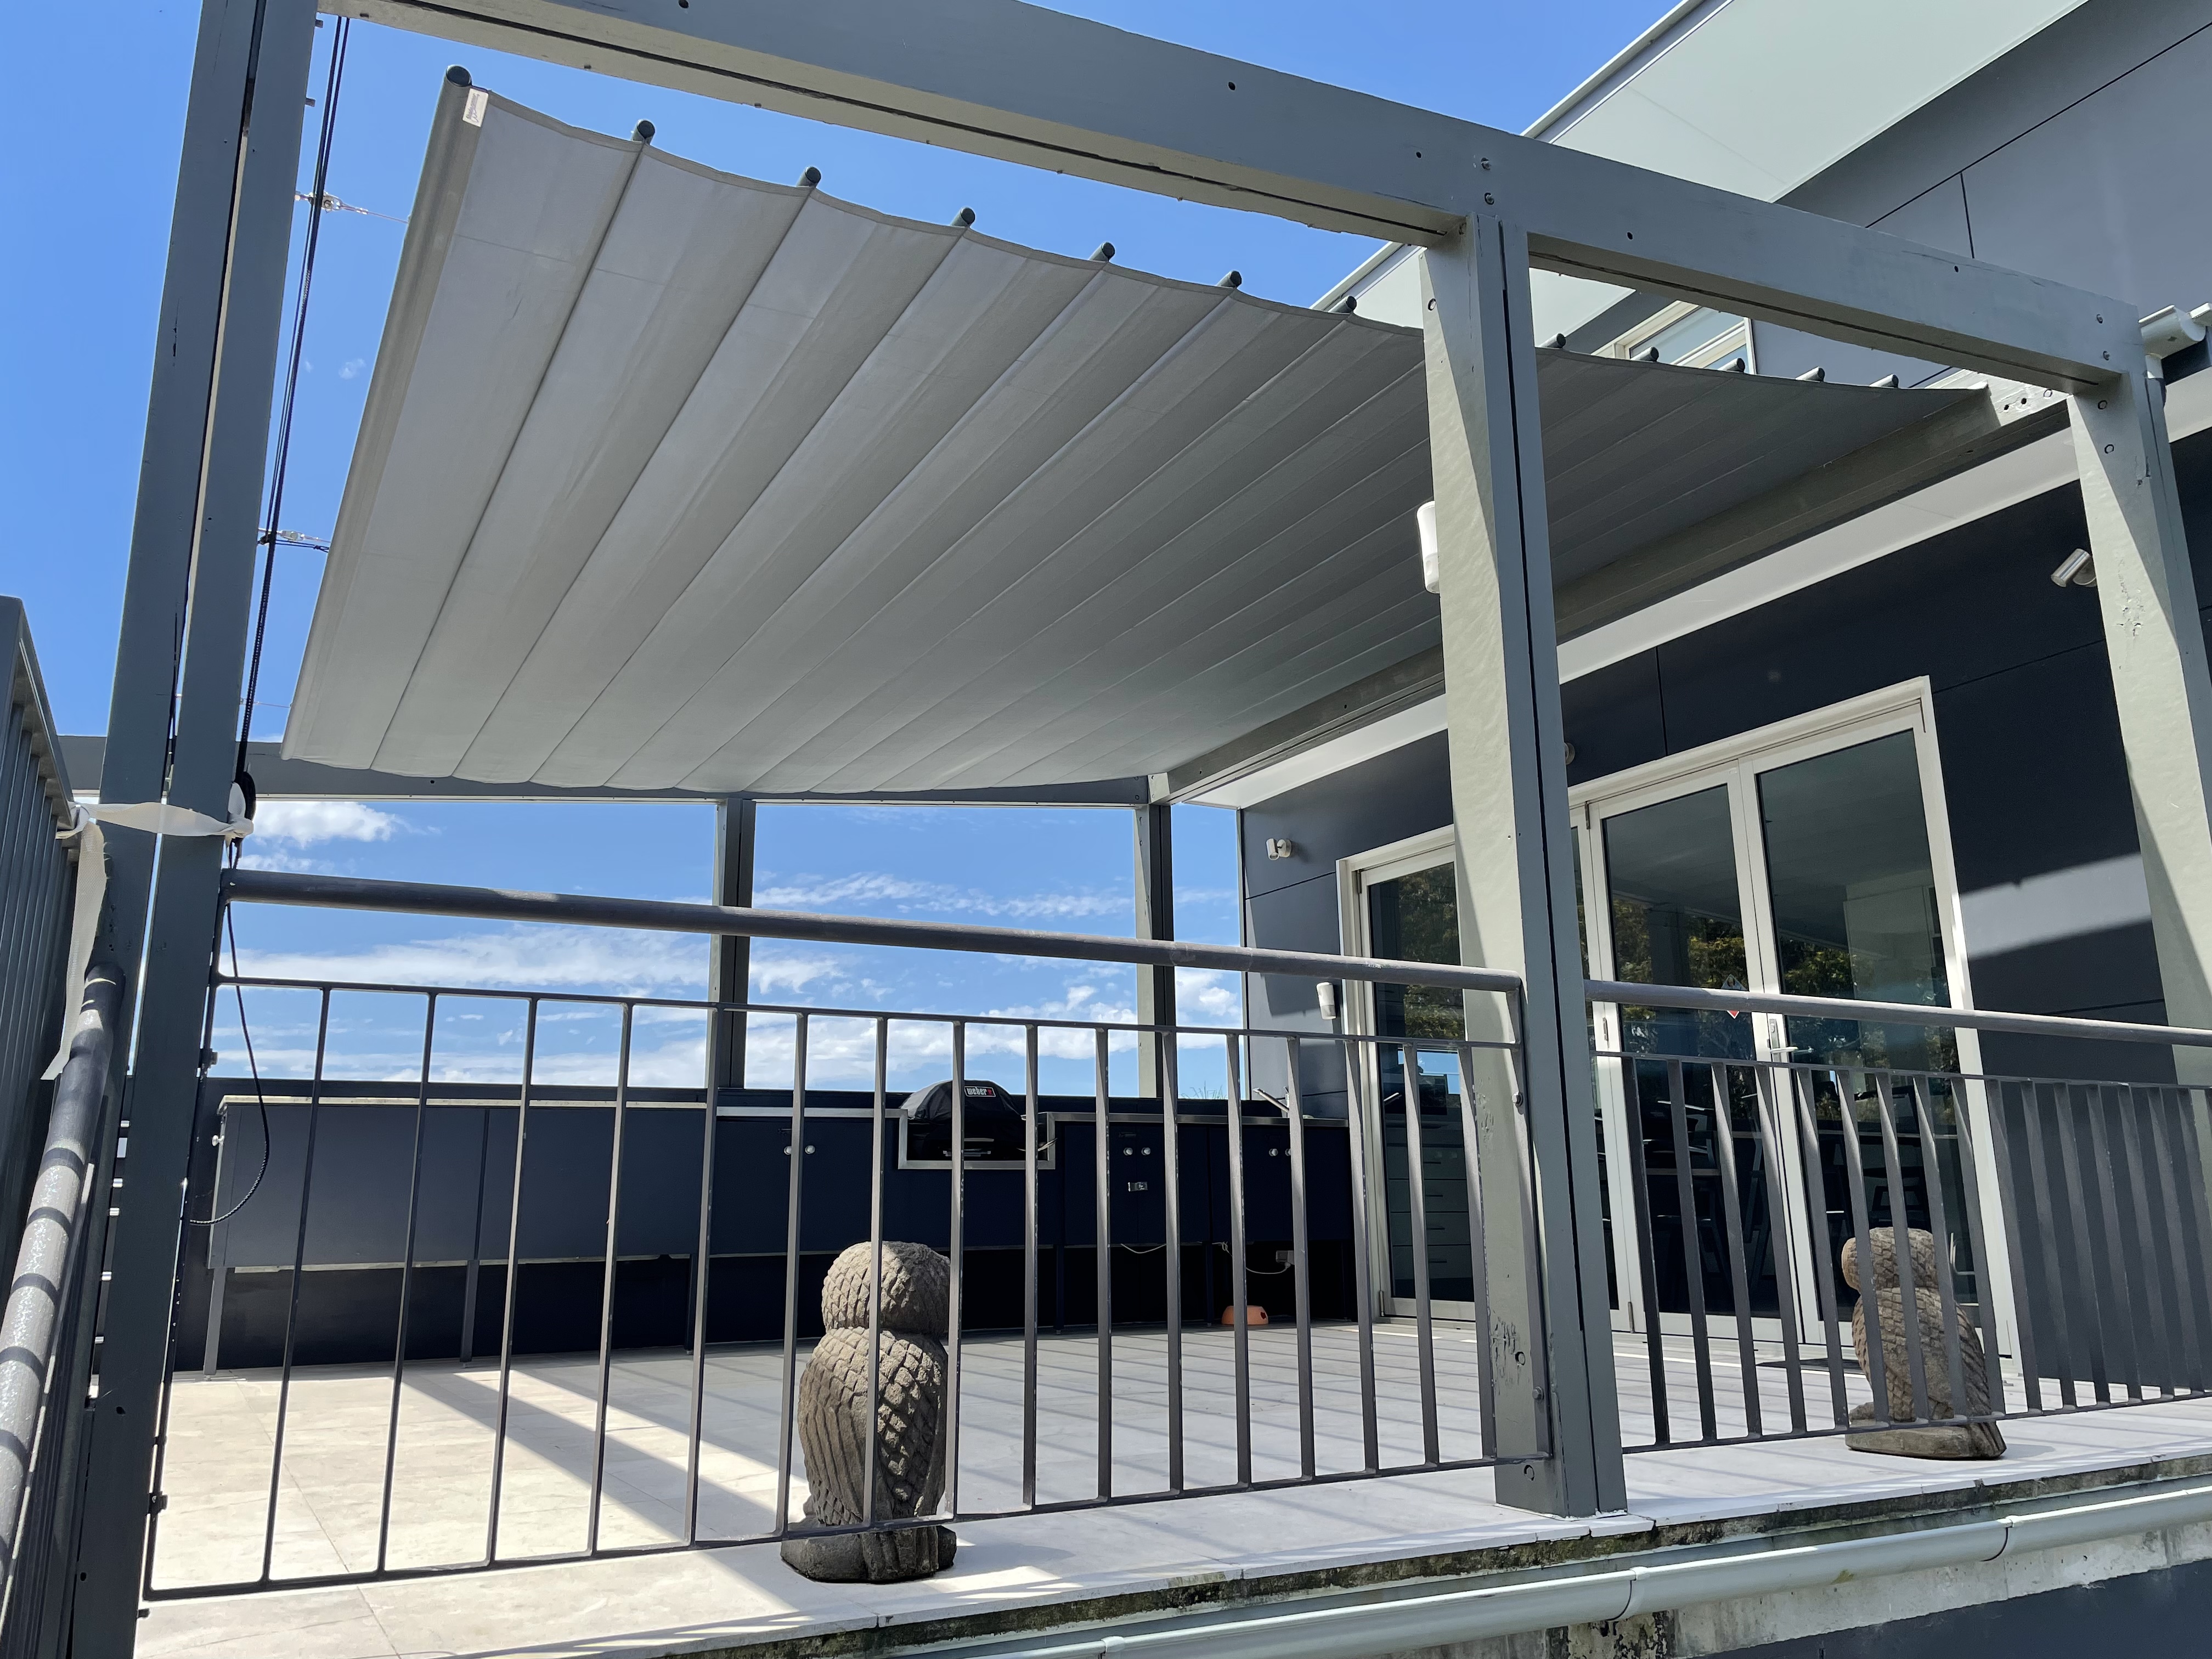 Shaderunner Retractable Awnings